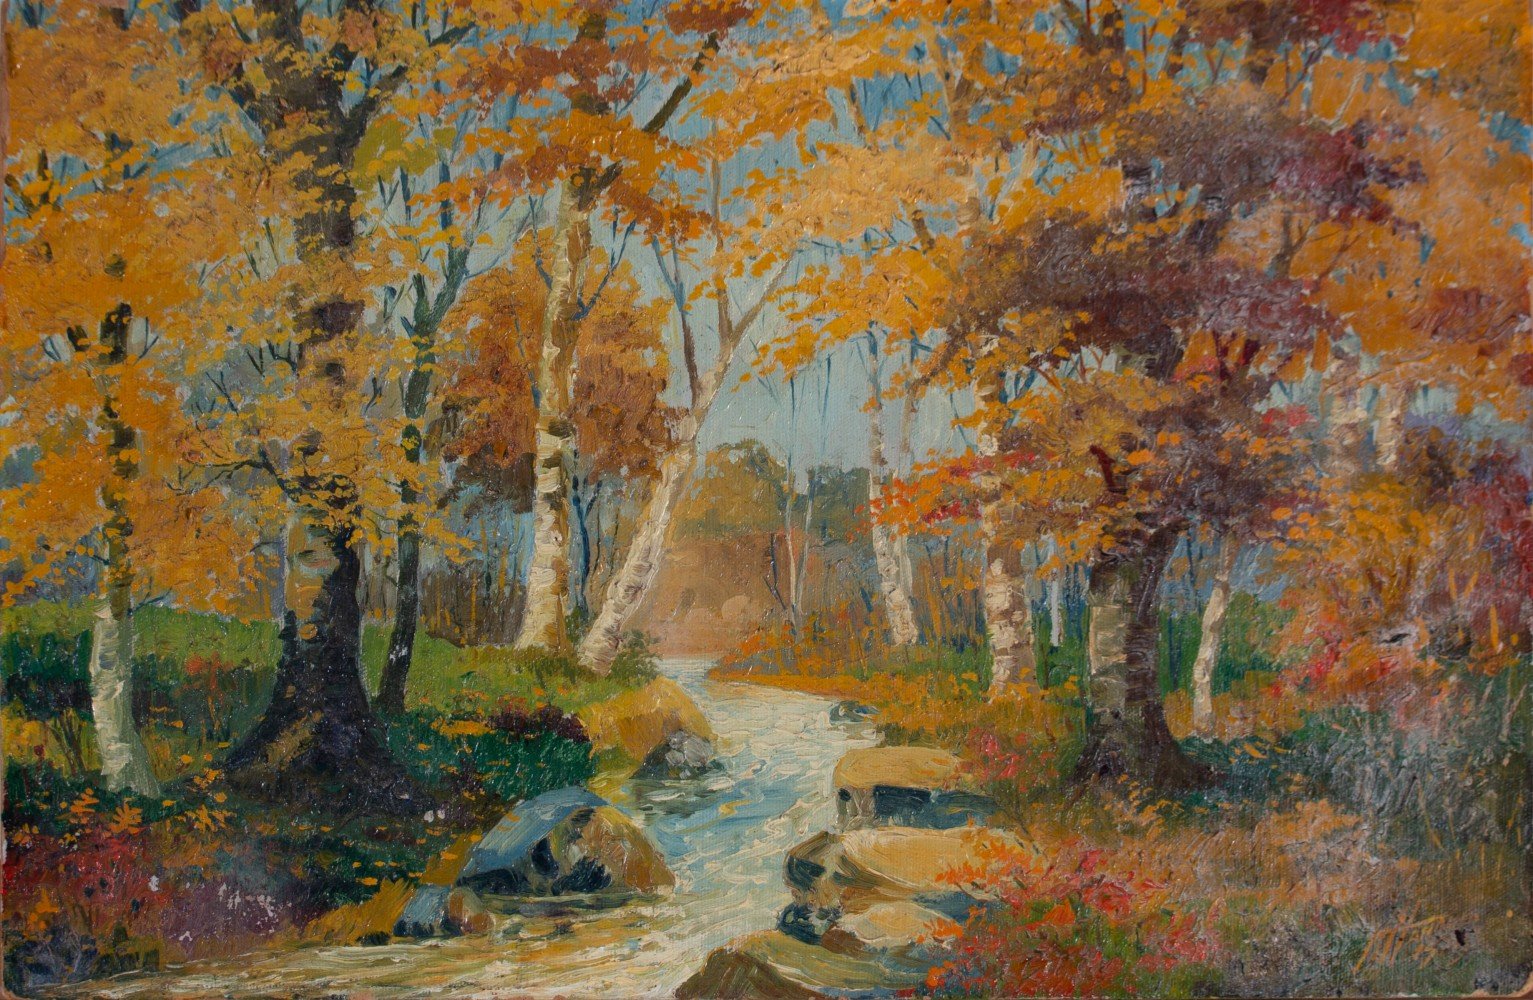 Early 20th Century American School, Wooded Landscape